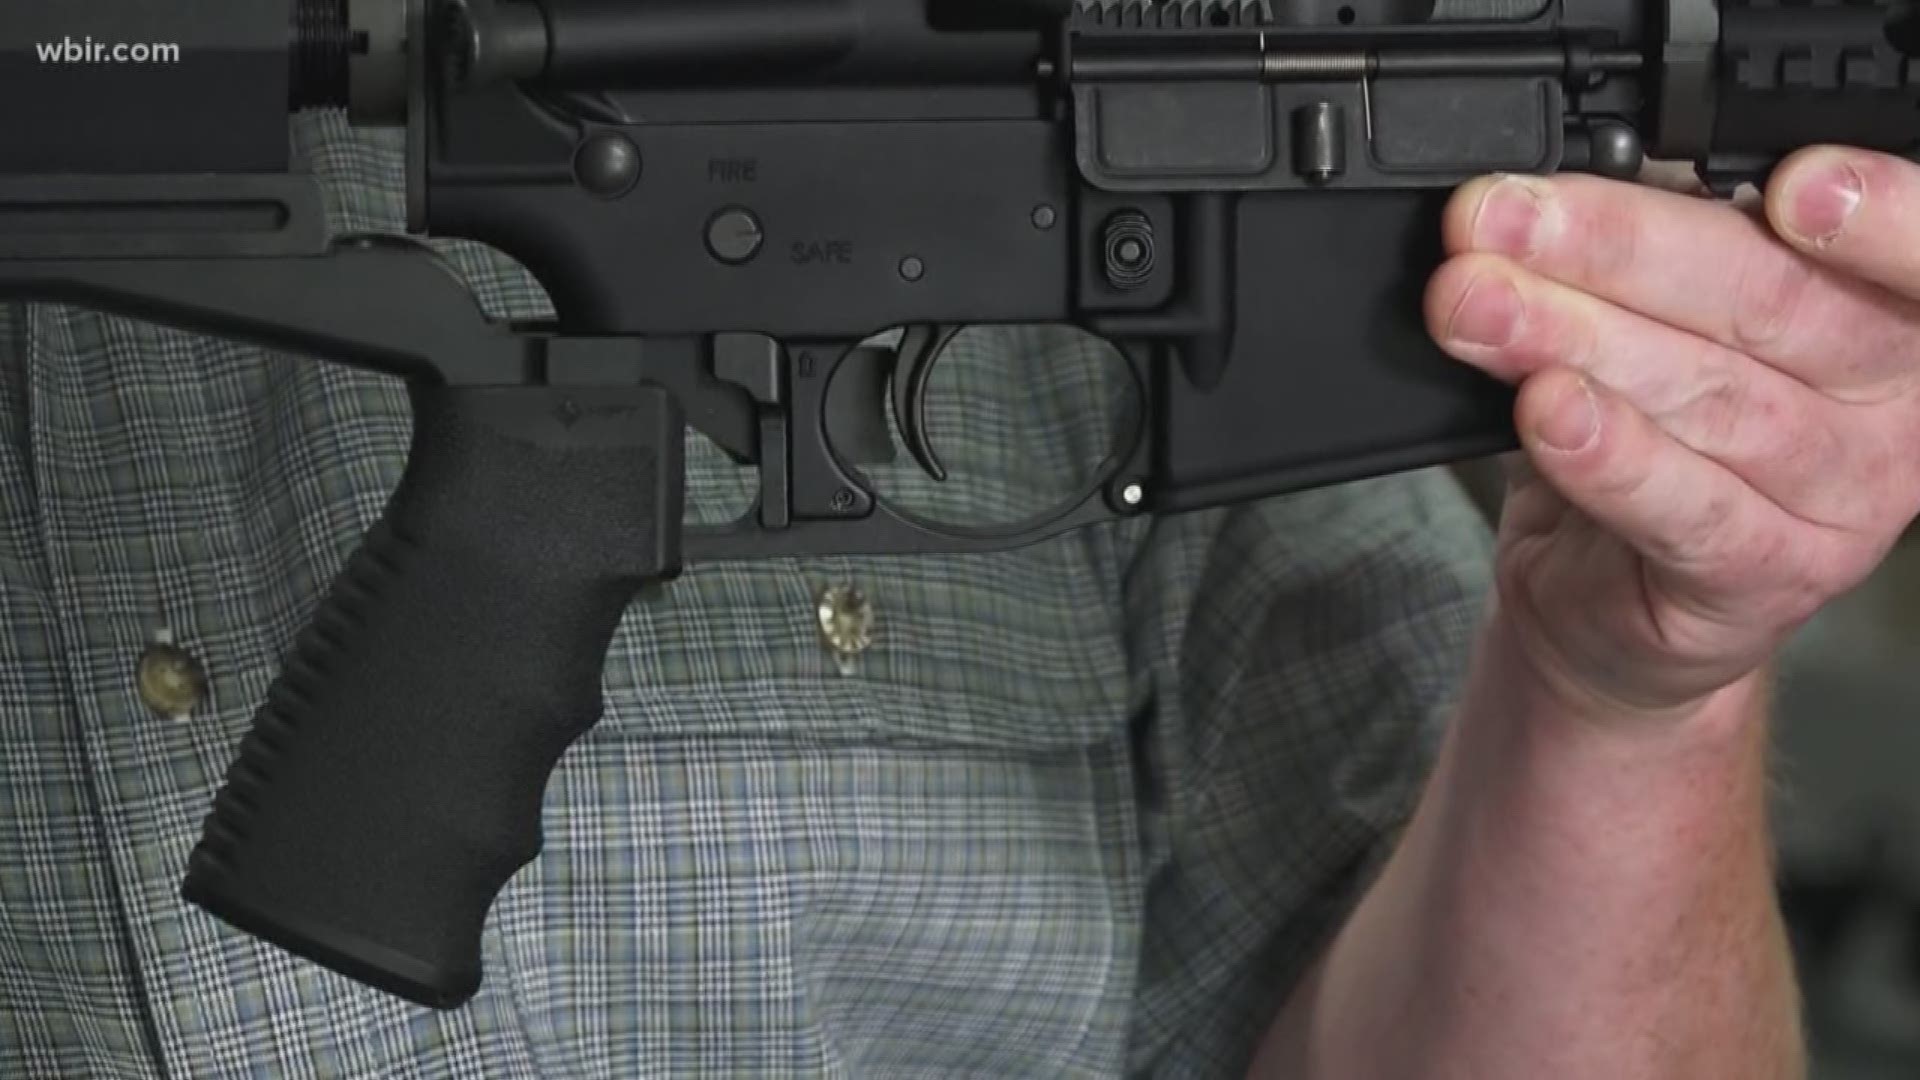 As of Tuesday, March 26 -- it will be illegal to possess, use or sell a firearm add-on known as a bump stock.